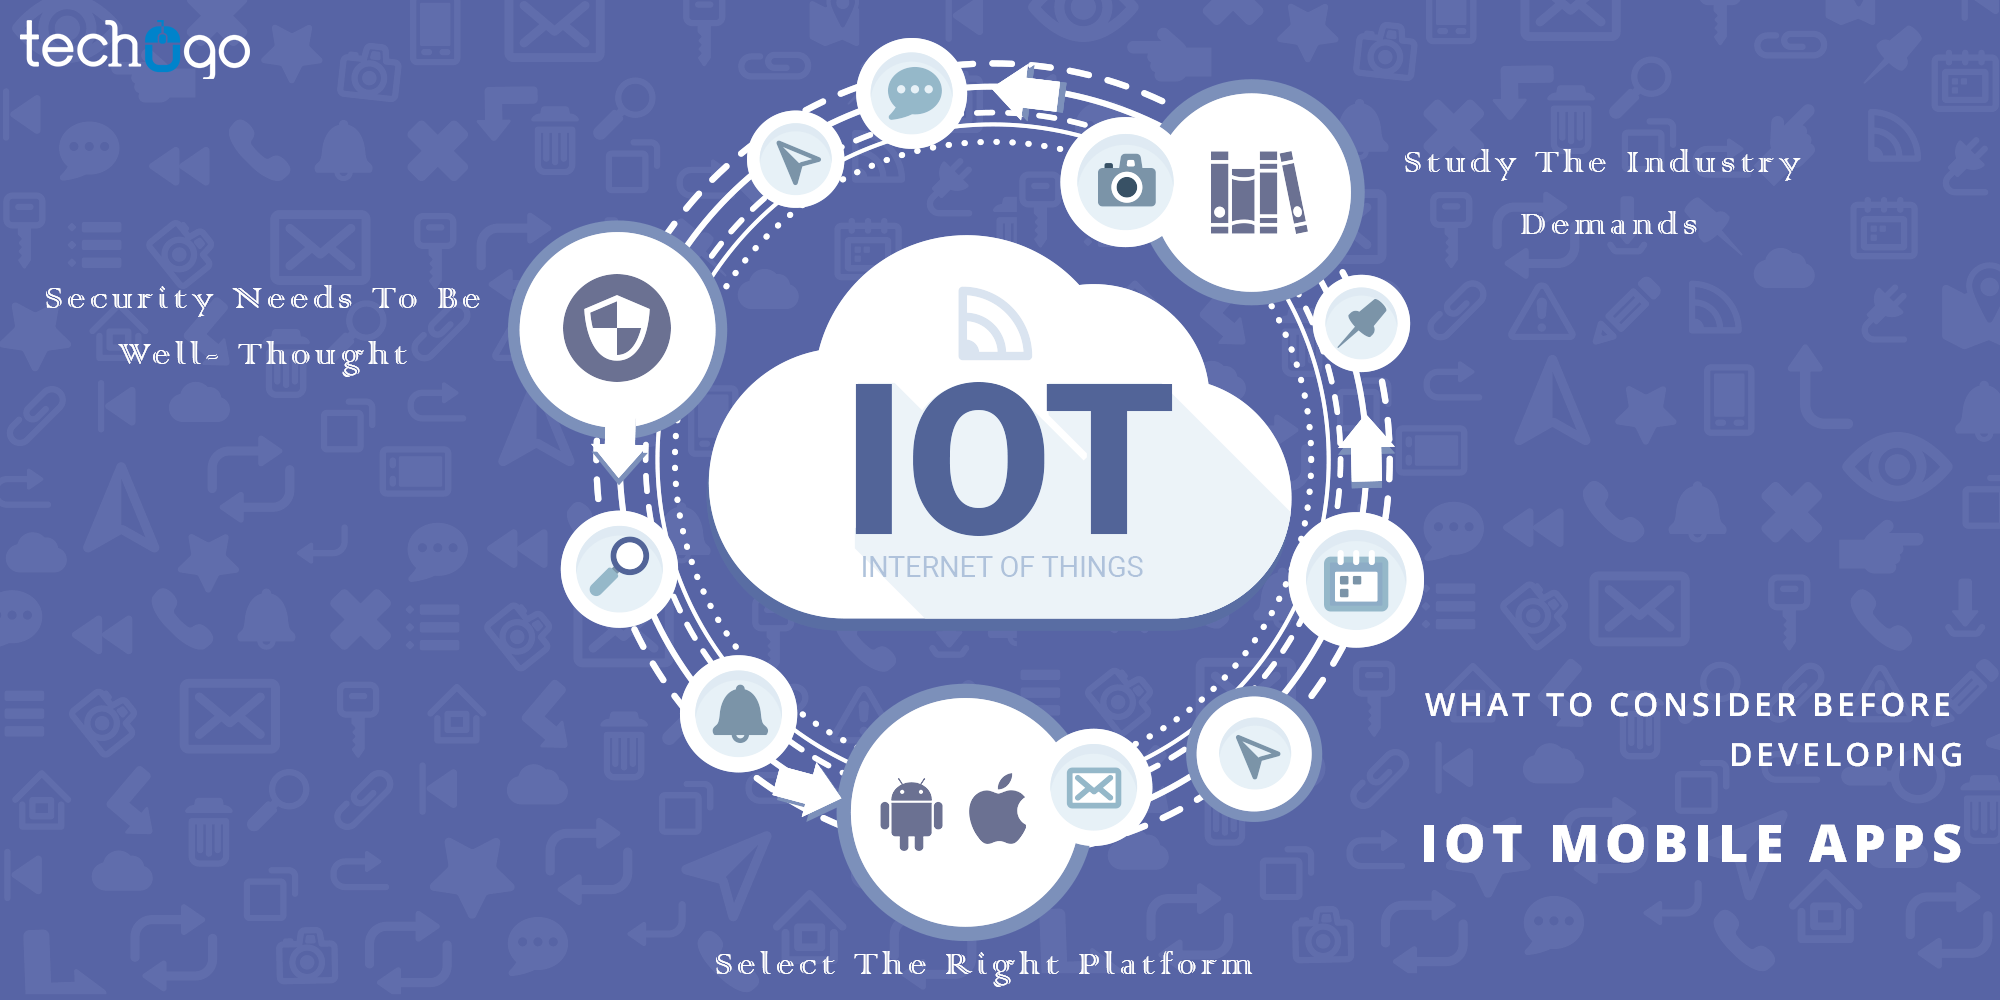 What To Consider Before Developing IOT Mobile Apps